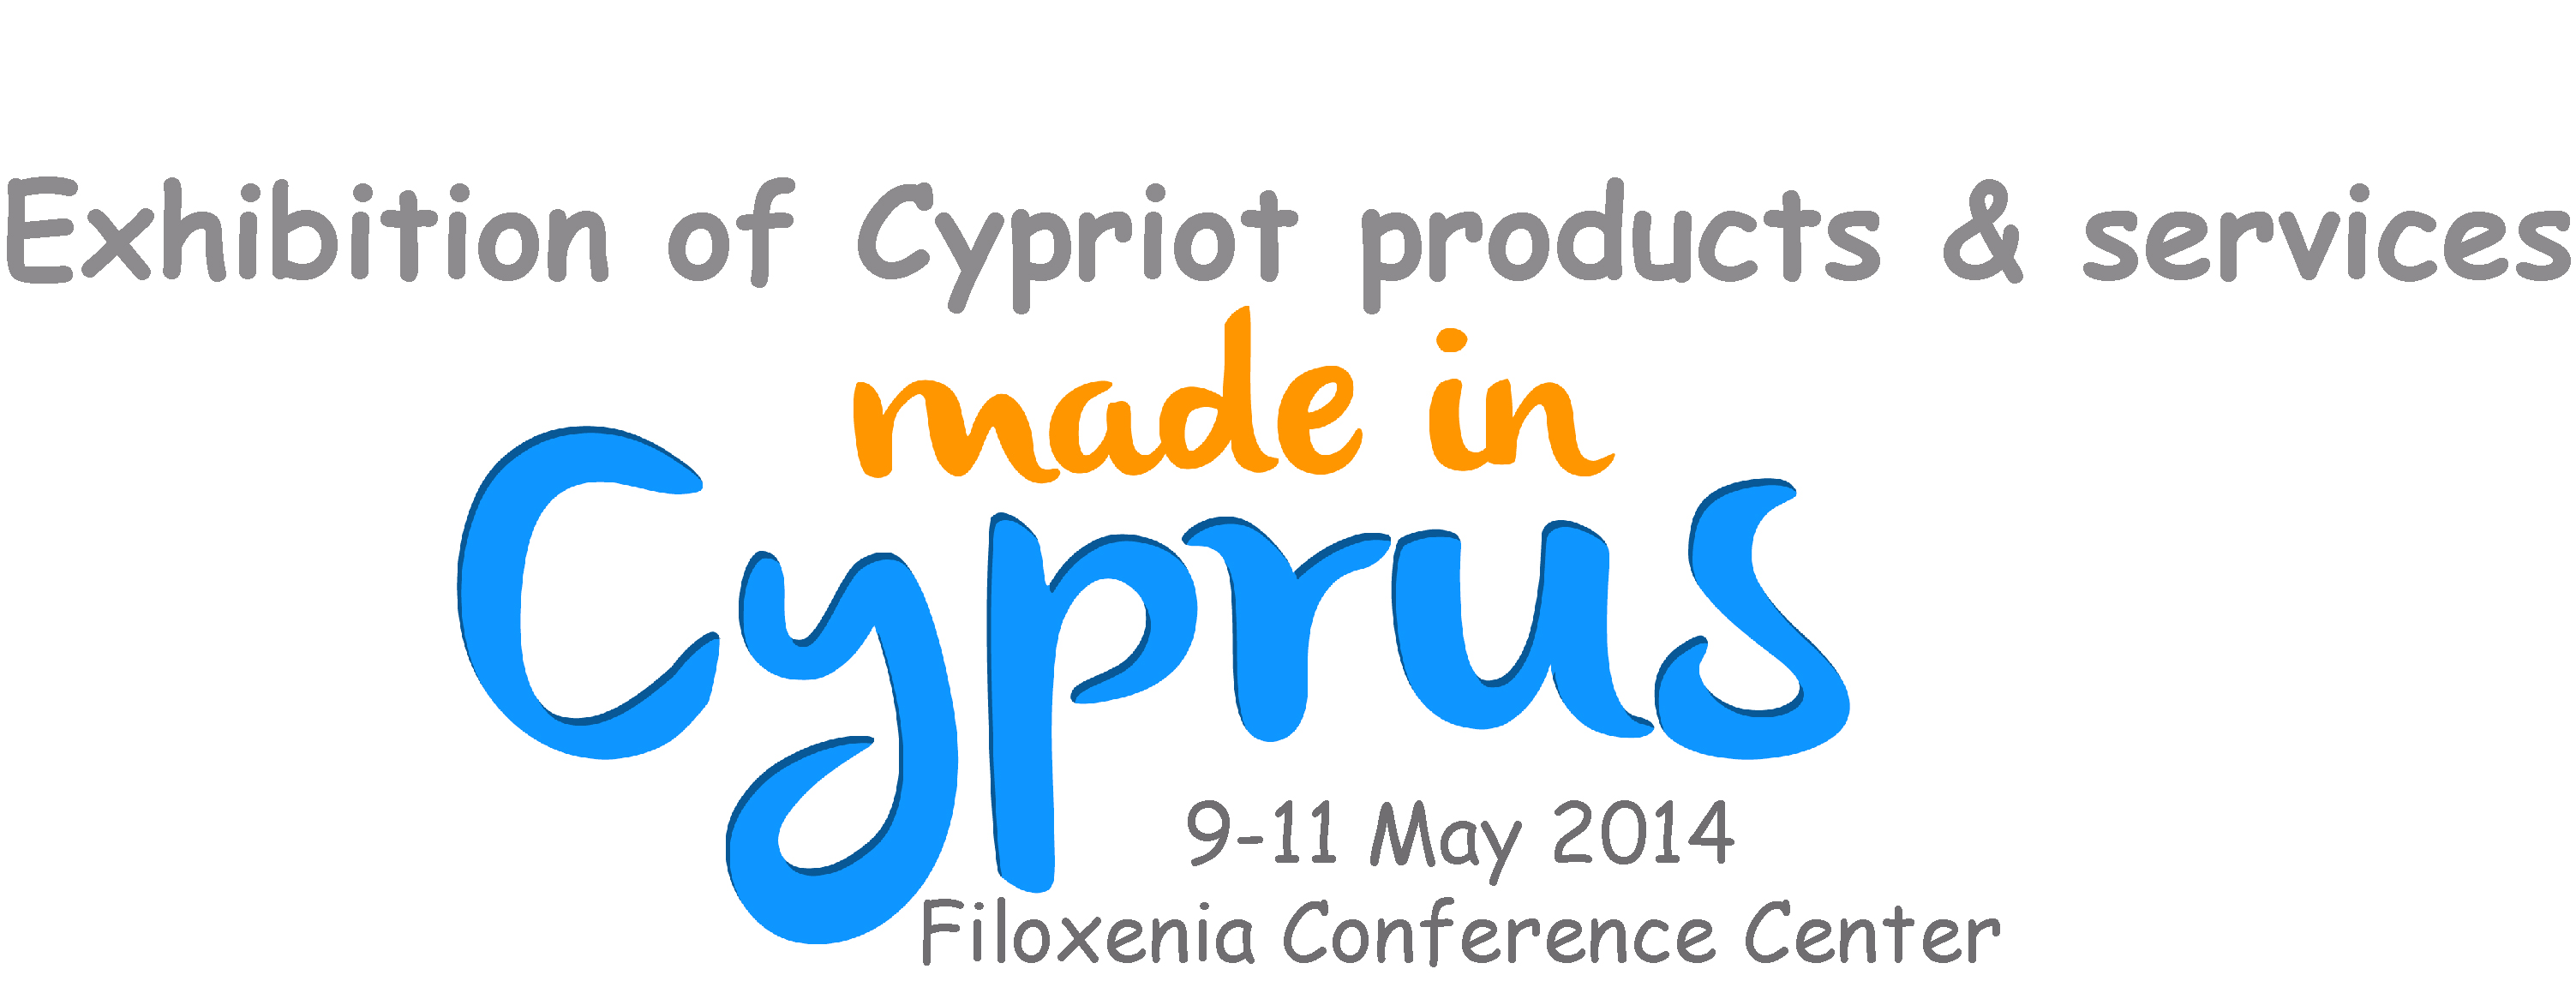 EXHIBITION OF CYPRUS PRODUCTS & SERVICES 